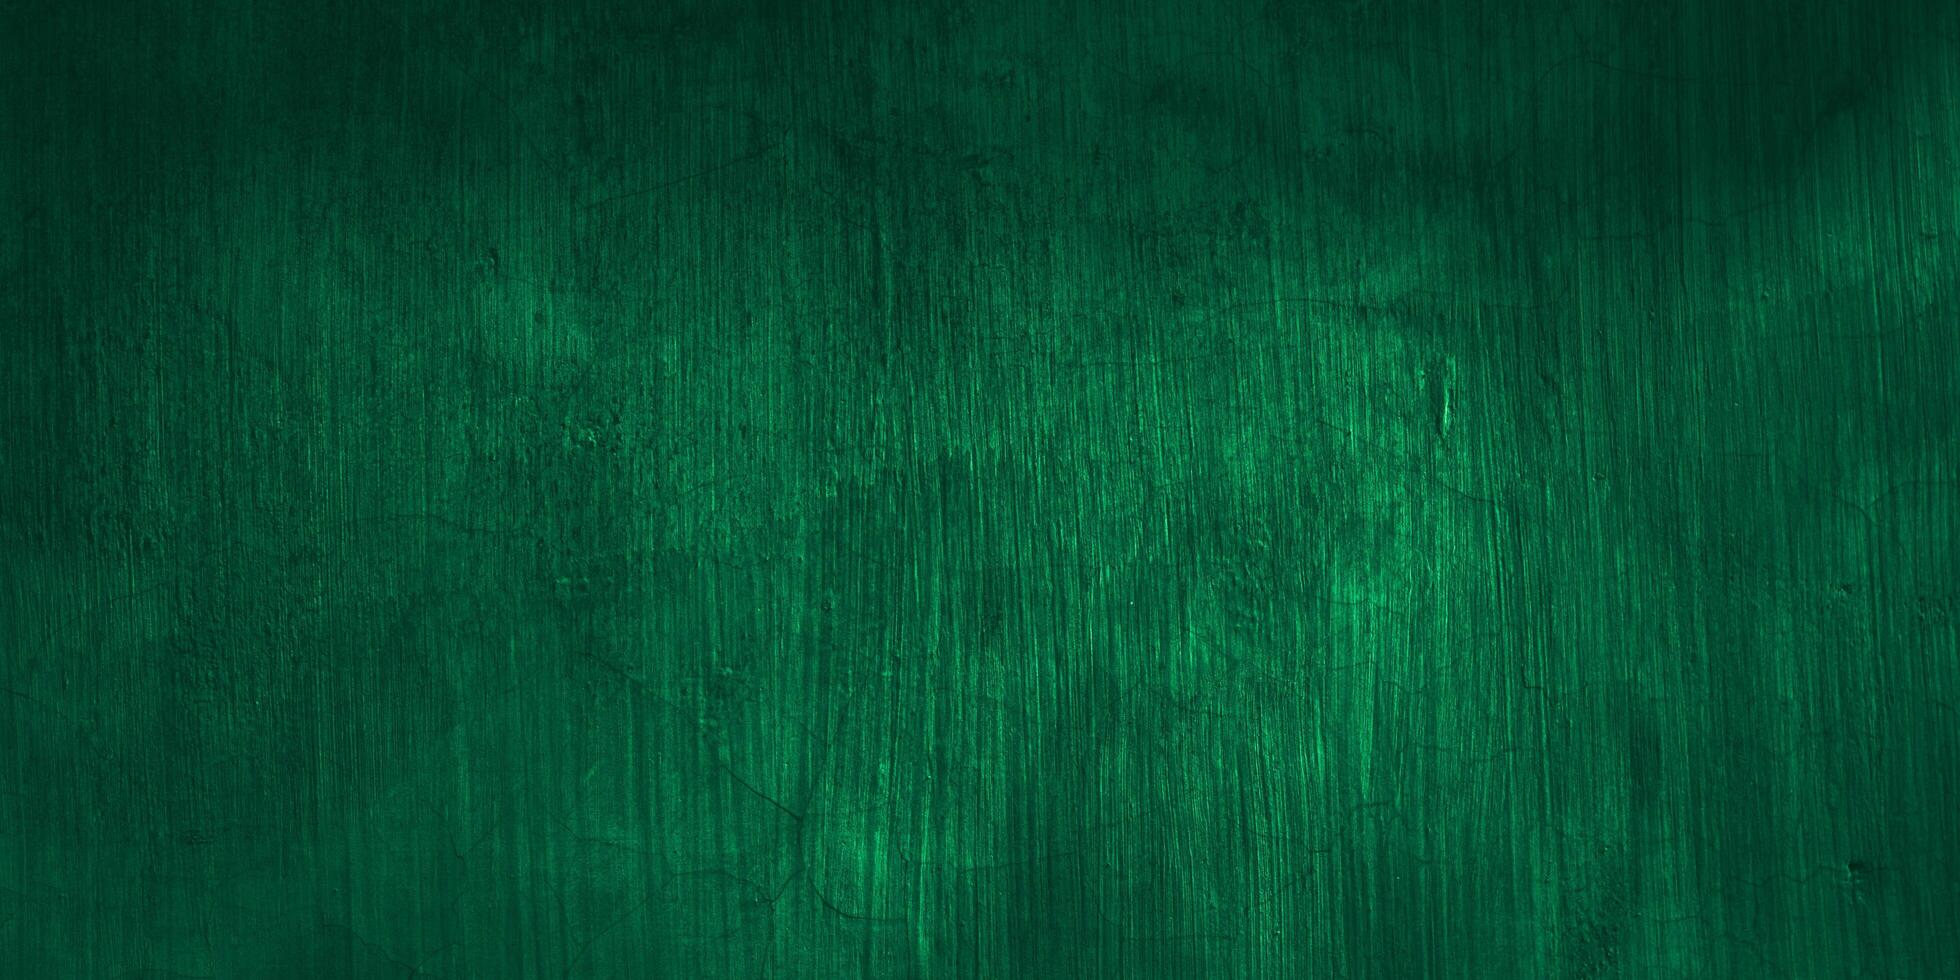 Texture abstract green wall background photo